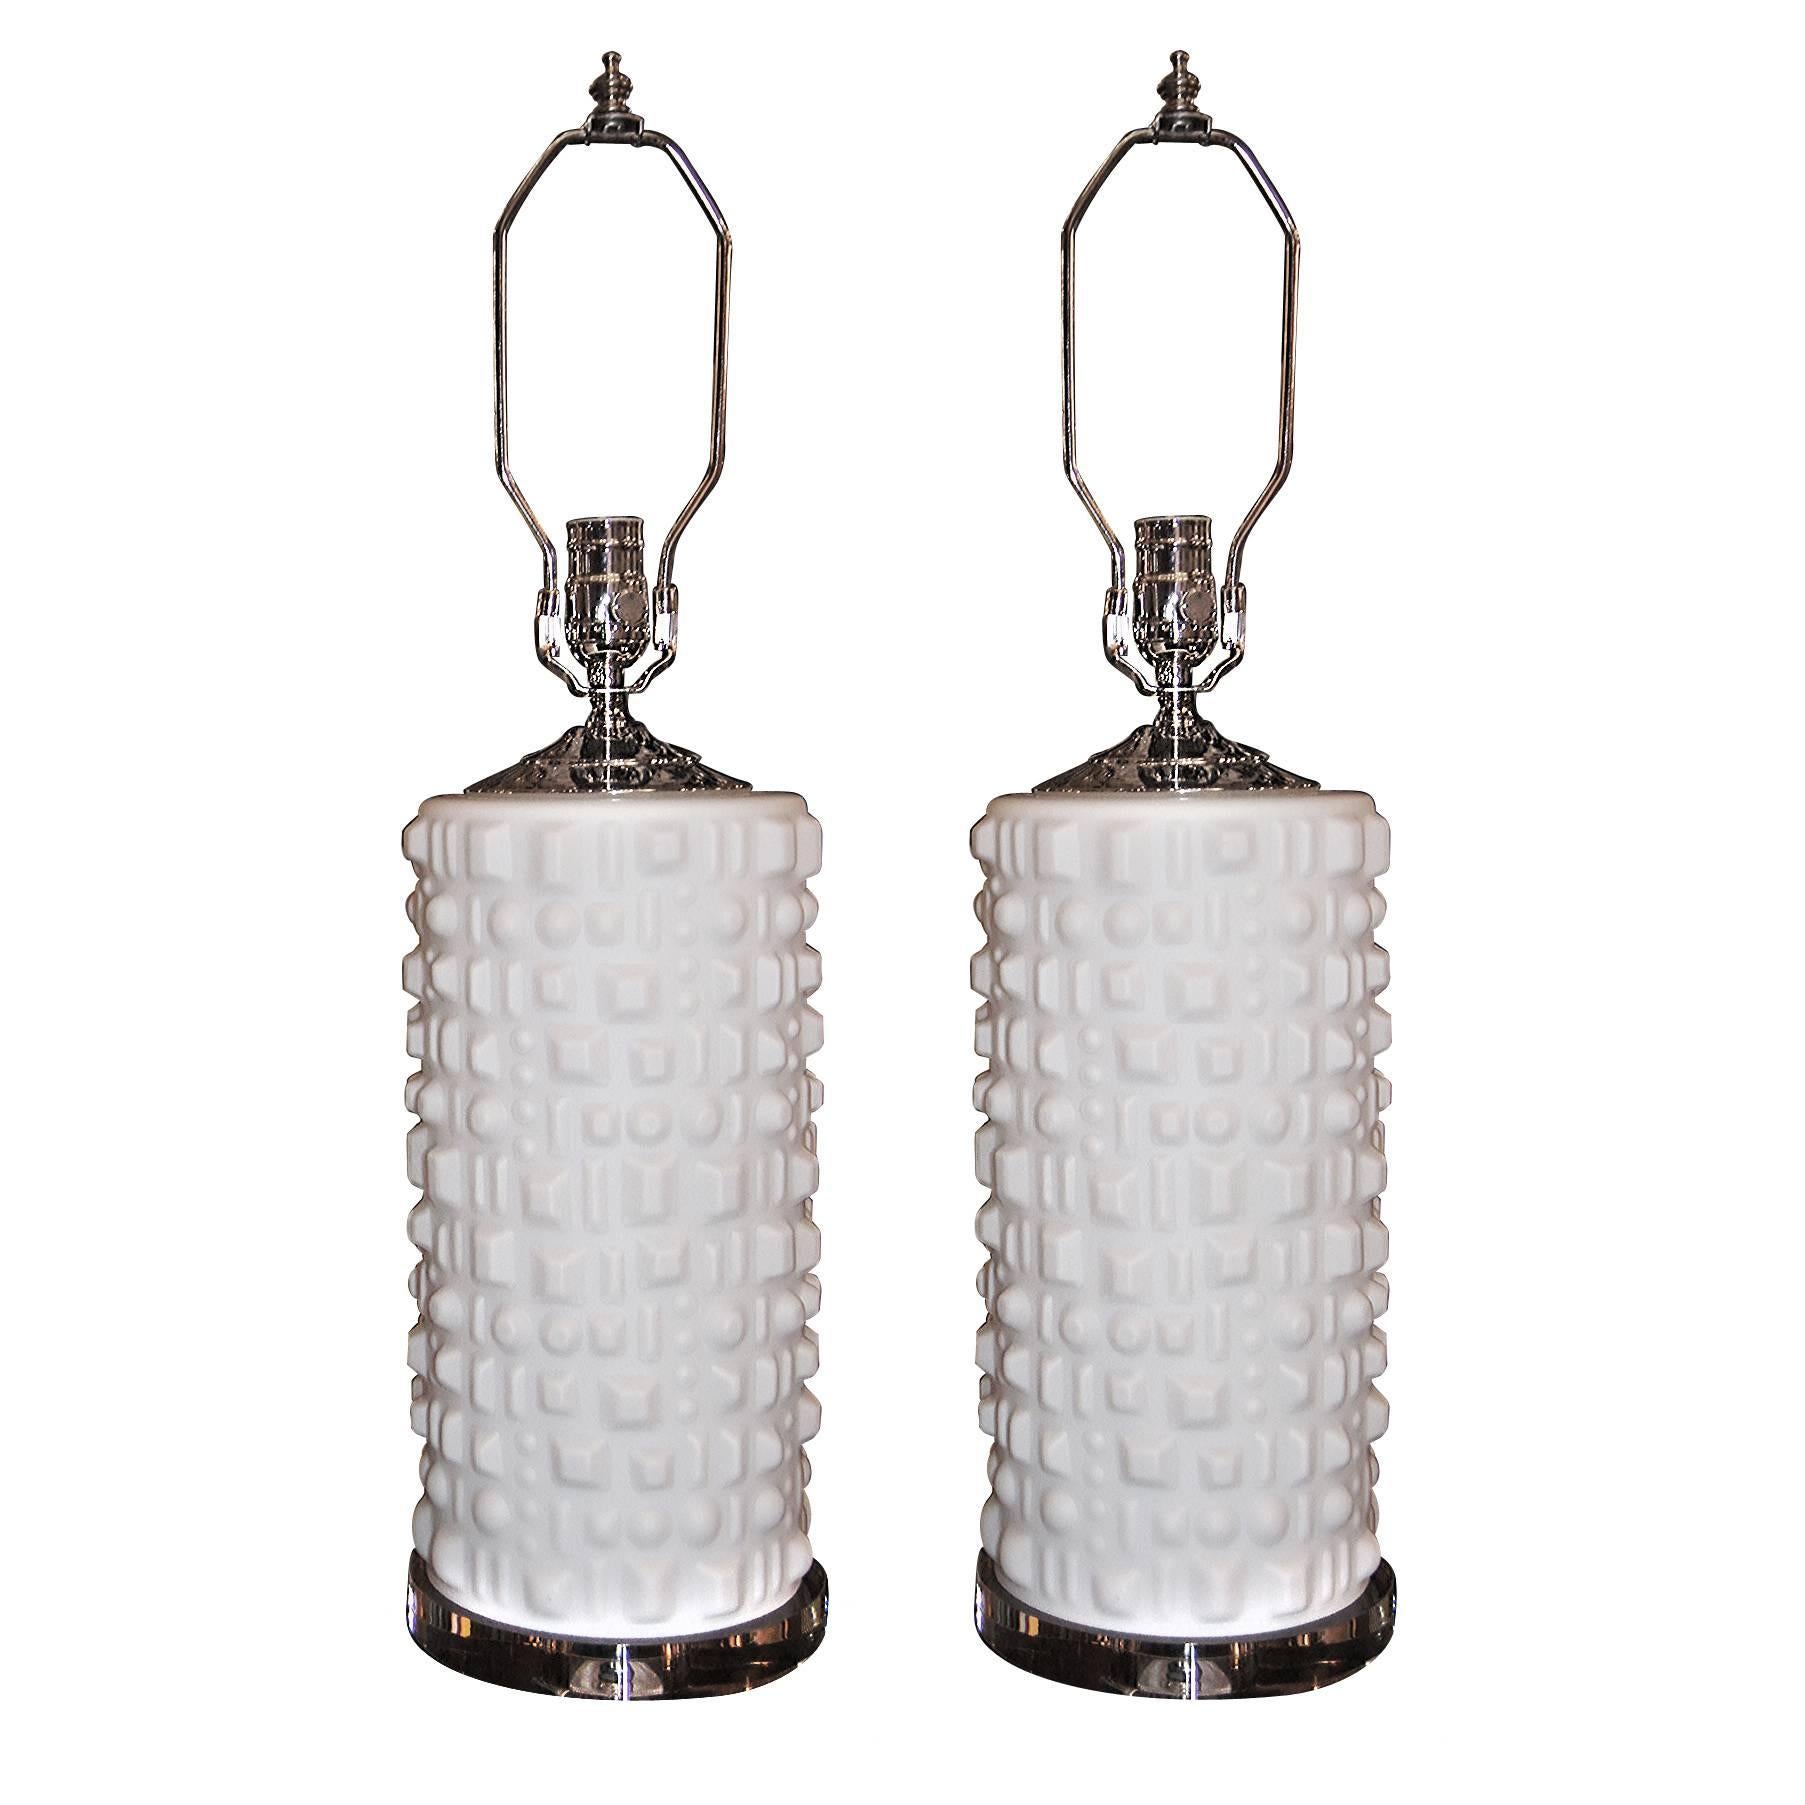 Pair of circa 1960s Italian large molded glass table lamps.

Measurements:
15.75